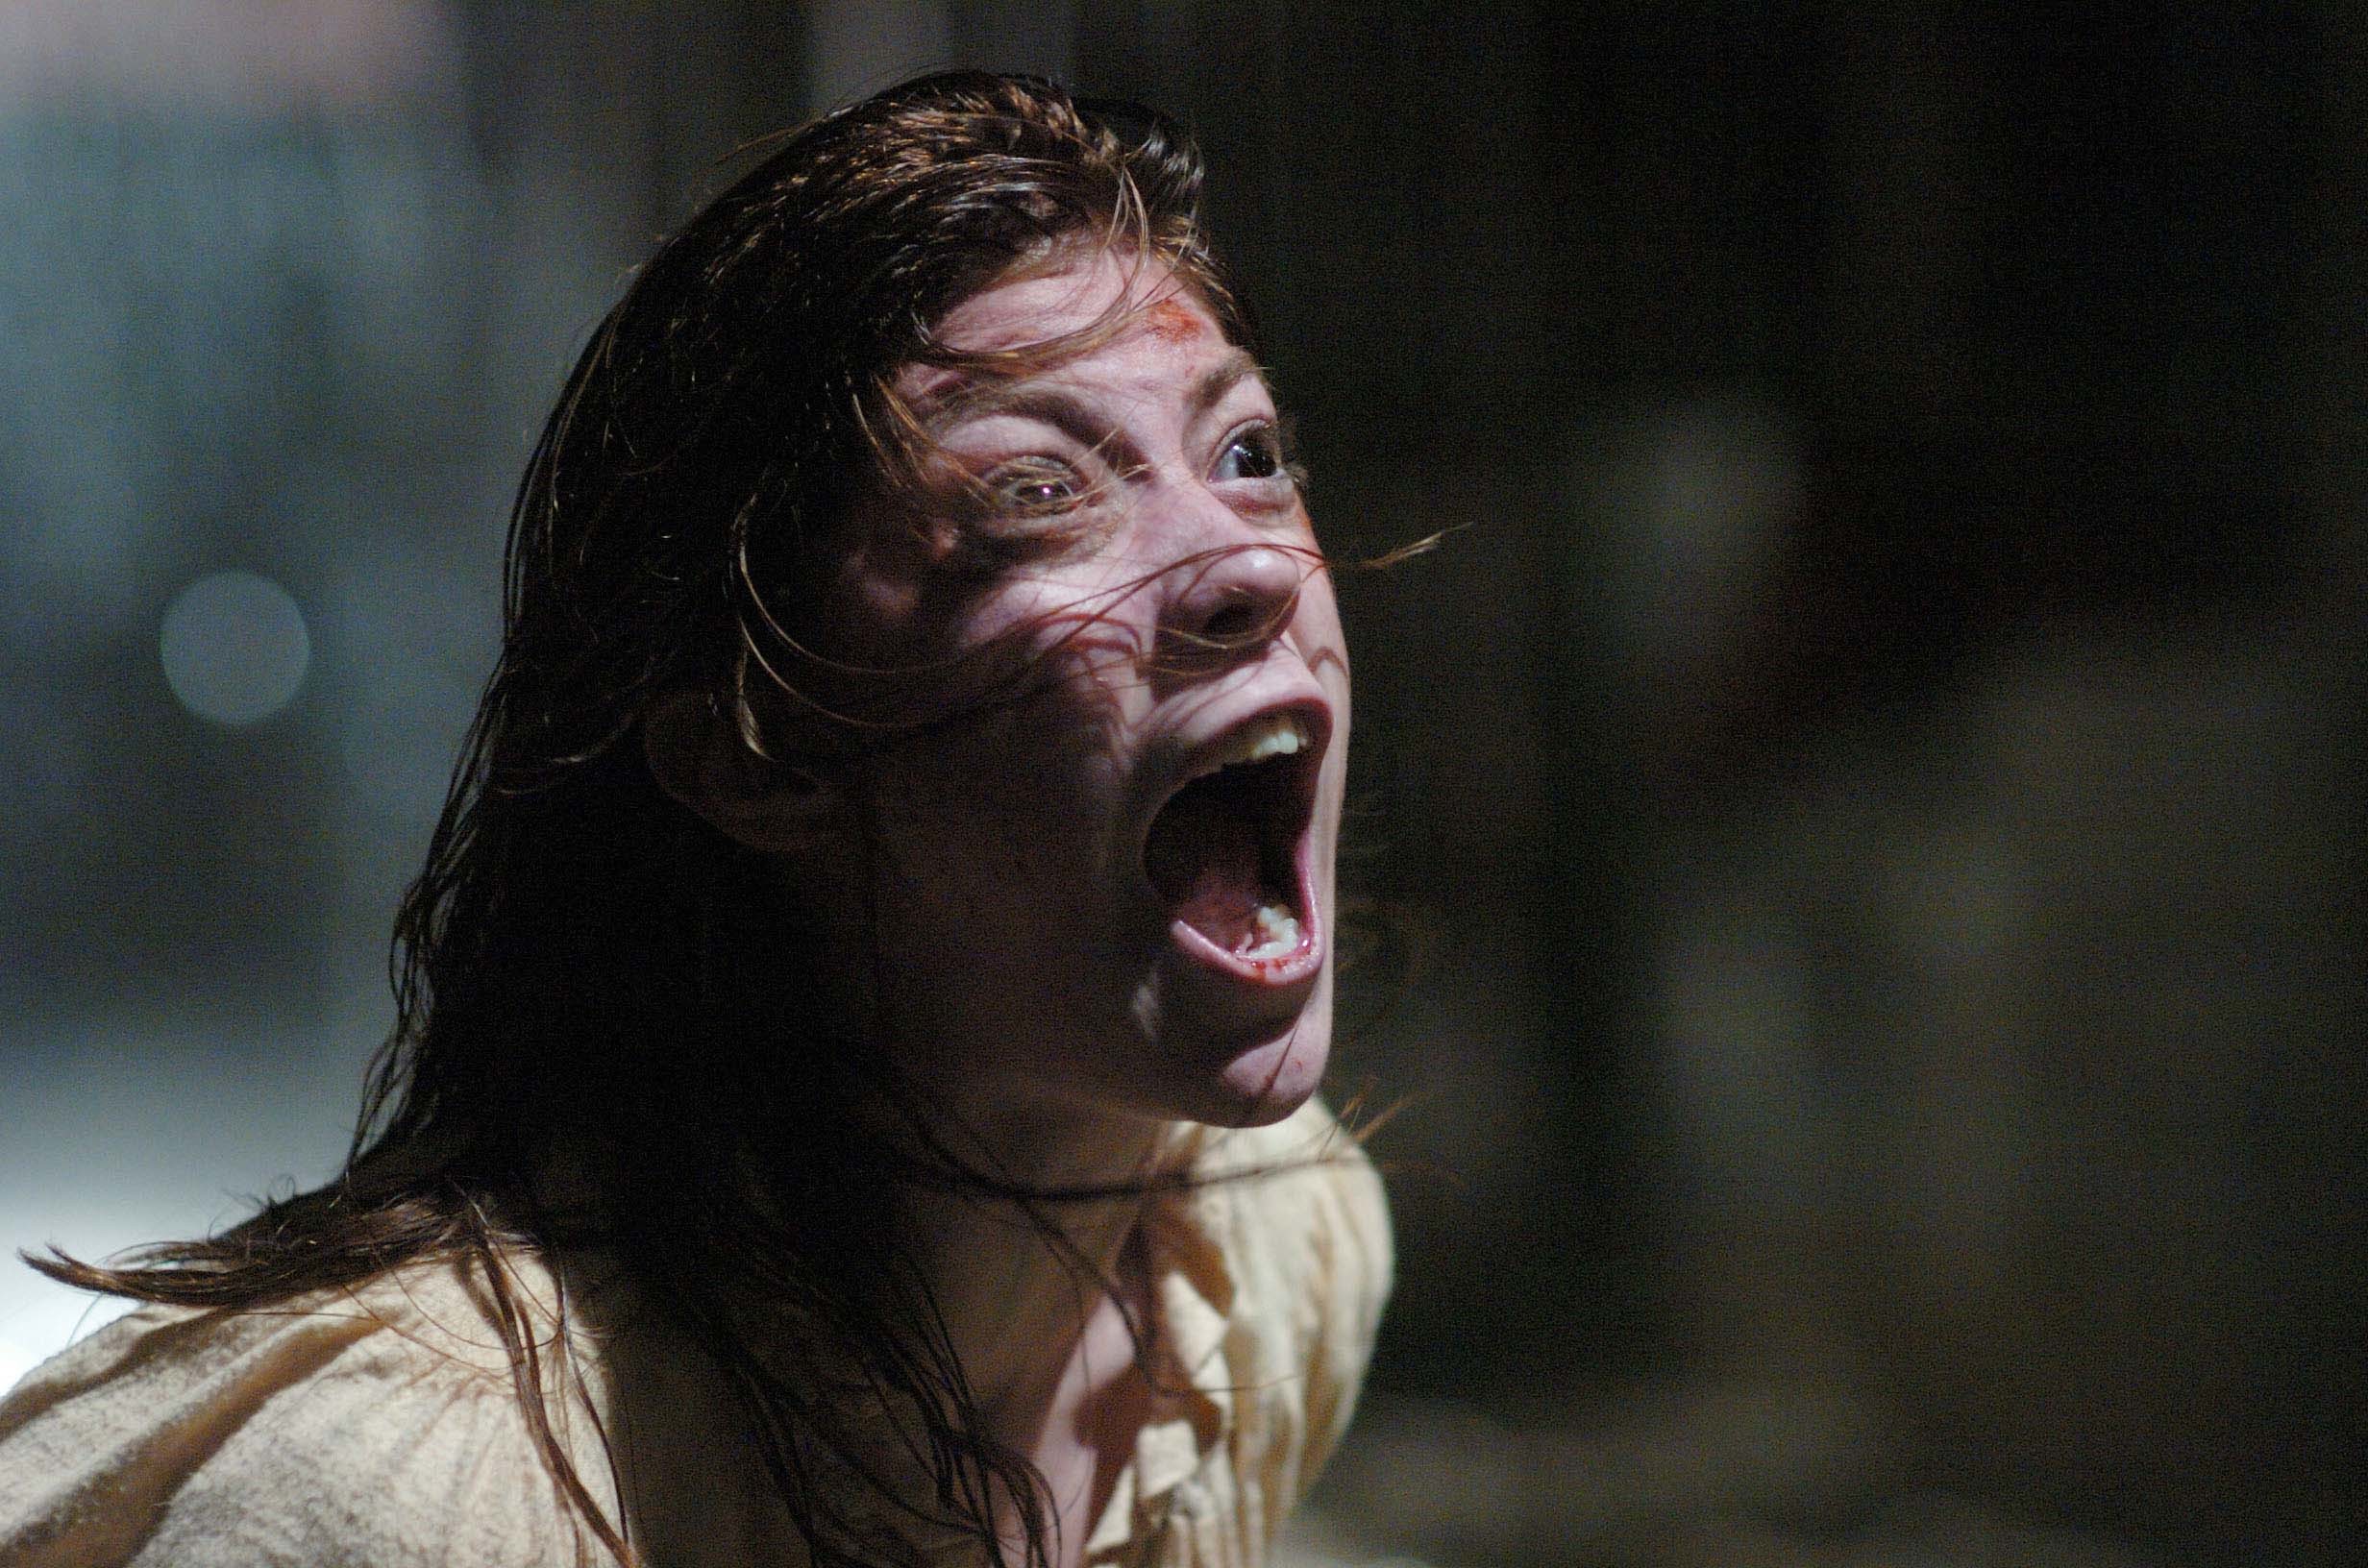 The Scariest Horror Movies Based on True Stories